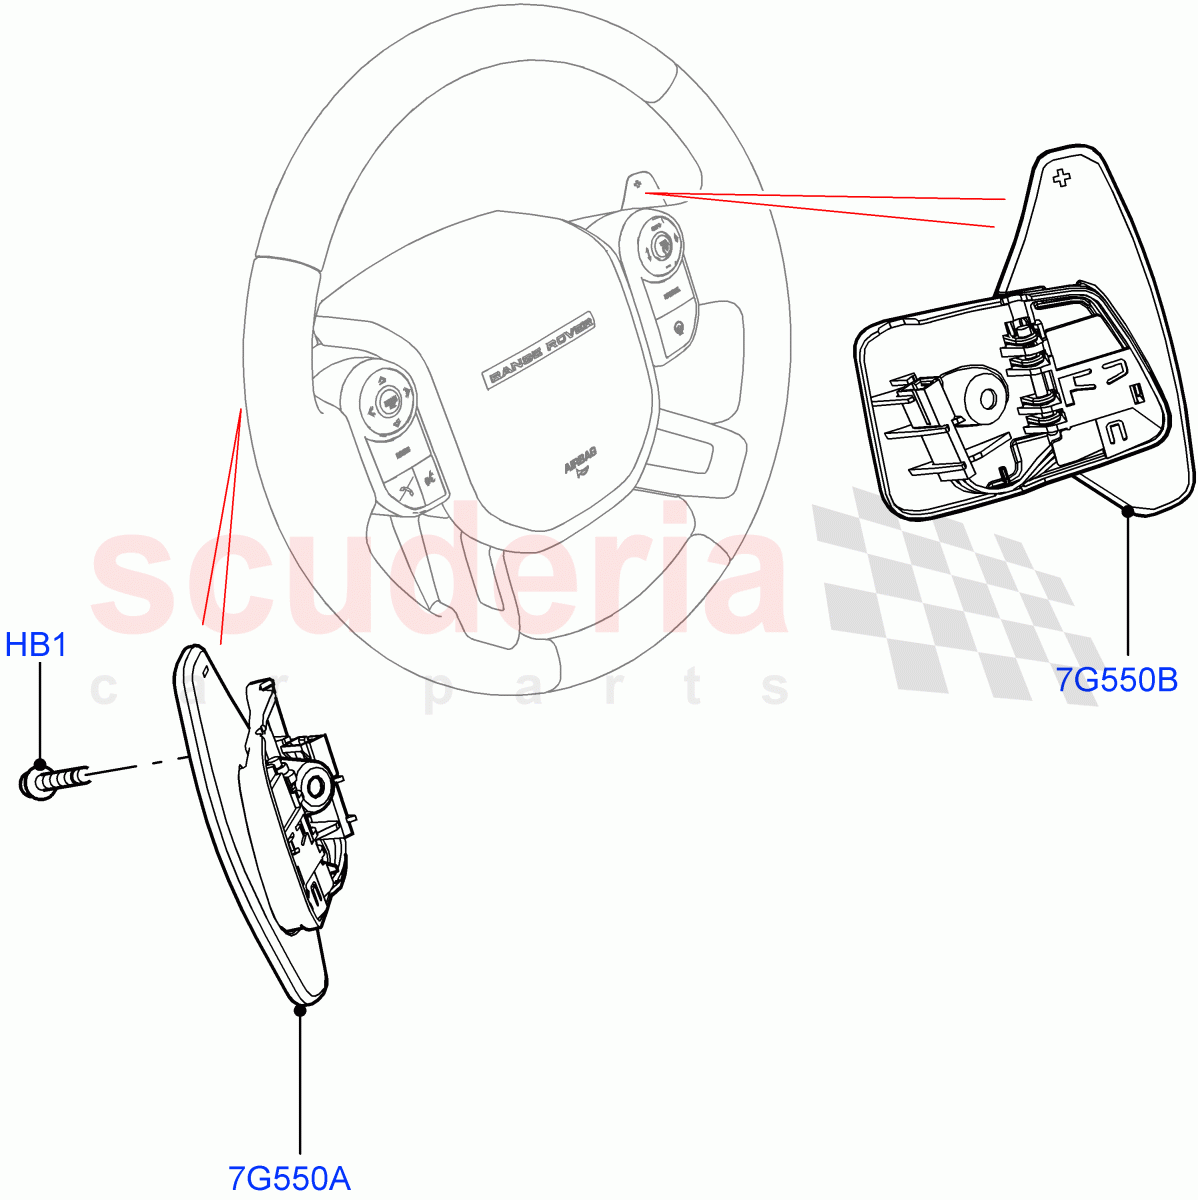 Gear Change-Automatic Transmission(Steering Wheel)(8 Speed Auto Trans ZF 8HP76,Paddle Shift,Paddle Shift - Noble,Paddle shift - Aluminium)((V)FROMKA000001) of Land Rover Land Rover Range Rover Sport (2014+) [2.0 Turbo Petrol GTDI]